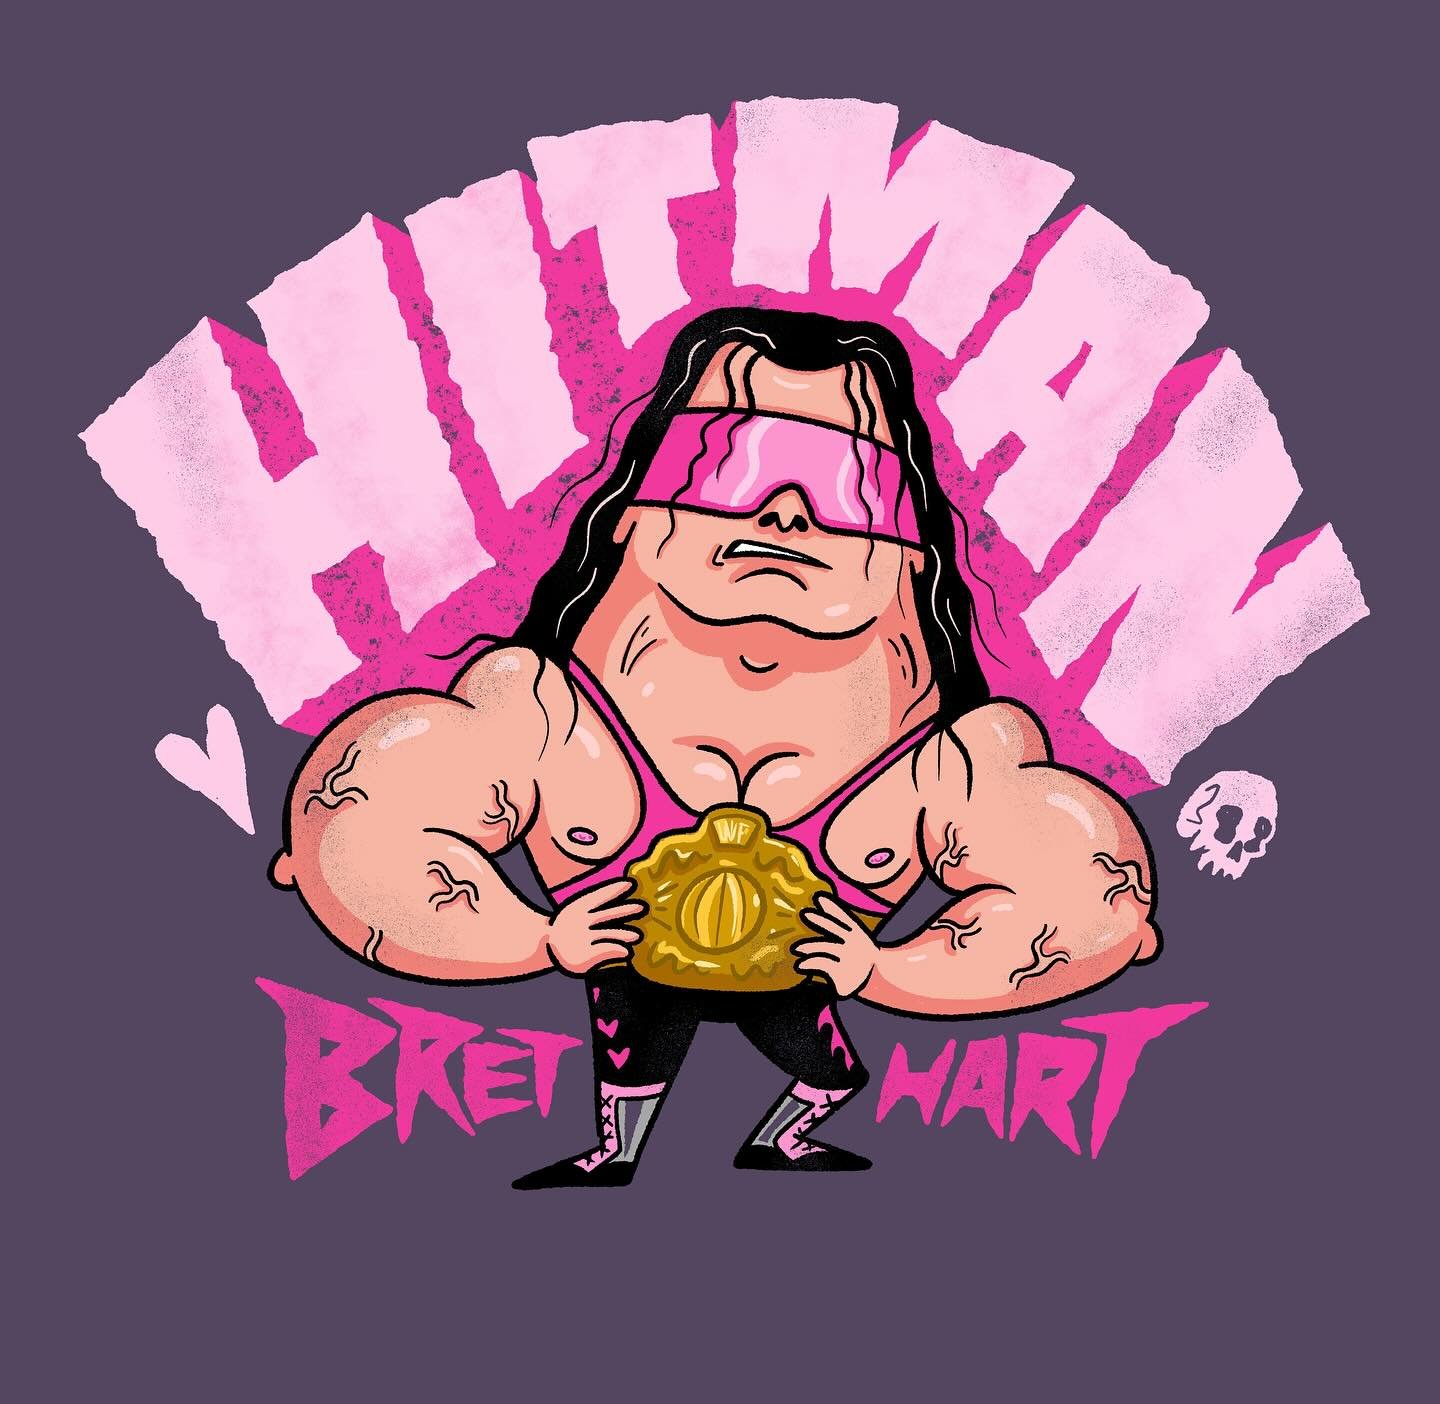 During this morning&rsquo;s livestream I drew #BretHart for @mikehartigan&rsquo;s #WrestleMAYnia prompt. You can watch the recording on my YT channel in the livestreams playlist. (Link in profile)

Let me know in the comments if you caught the stream